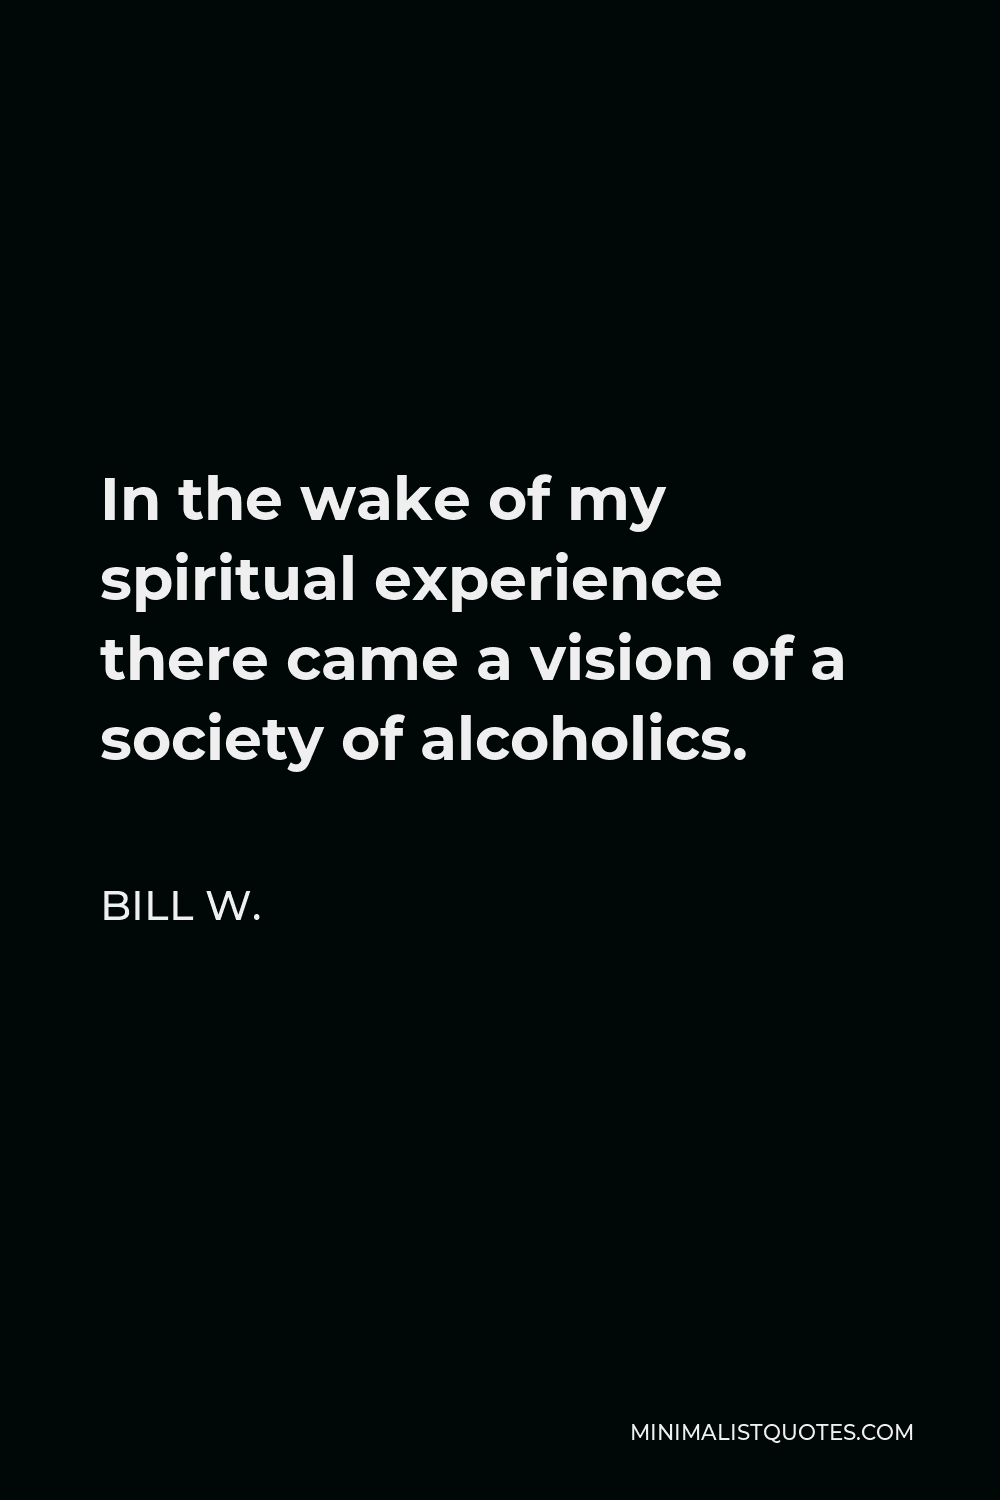 Bill W. Quote - In the wake of my spiritual experience there came a vision of a society of alcoholics.